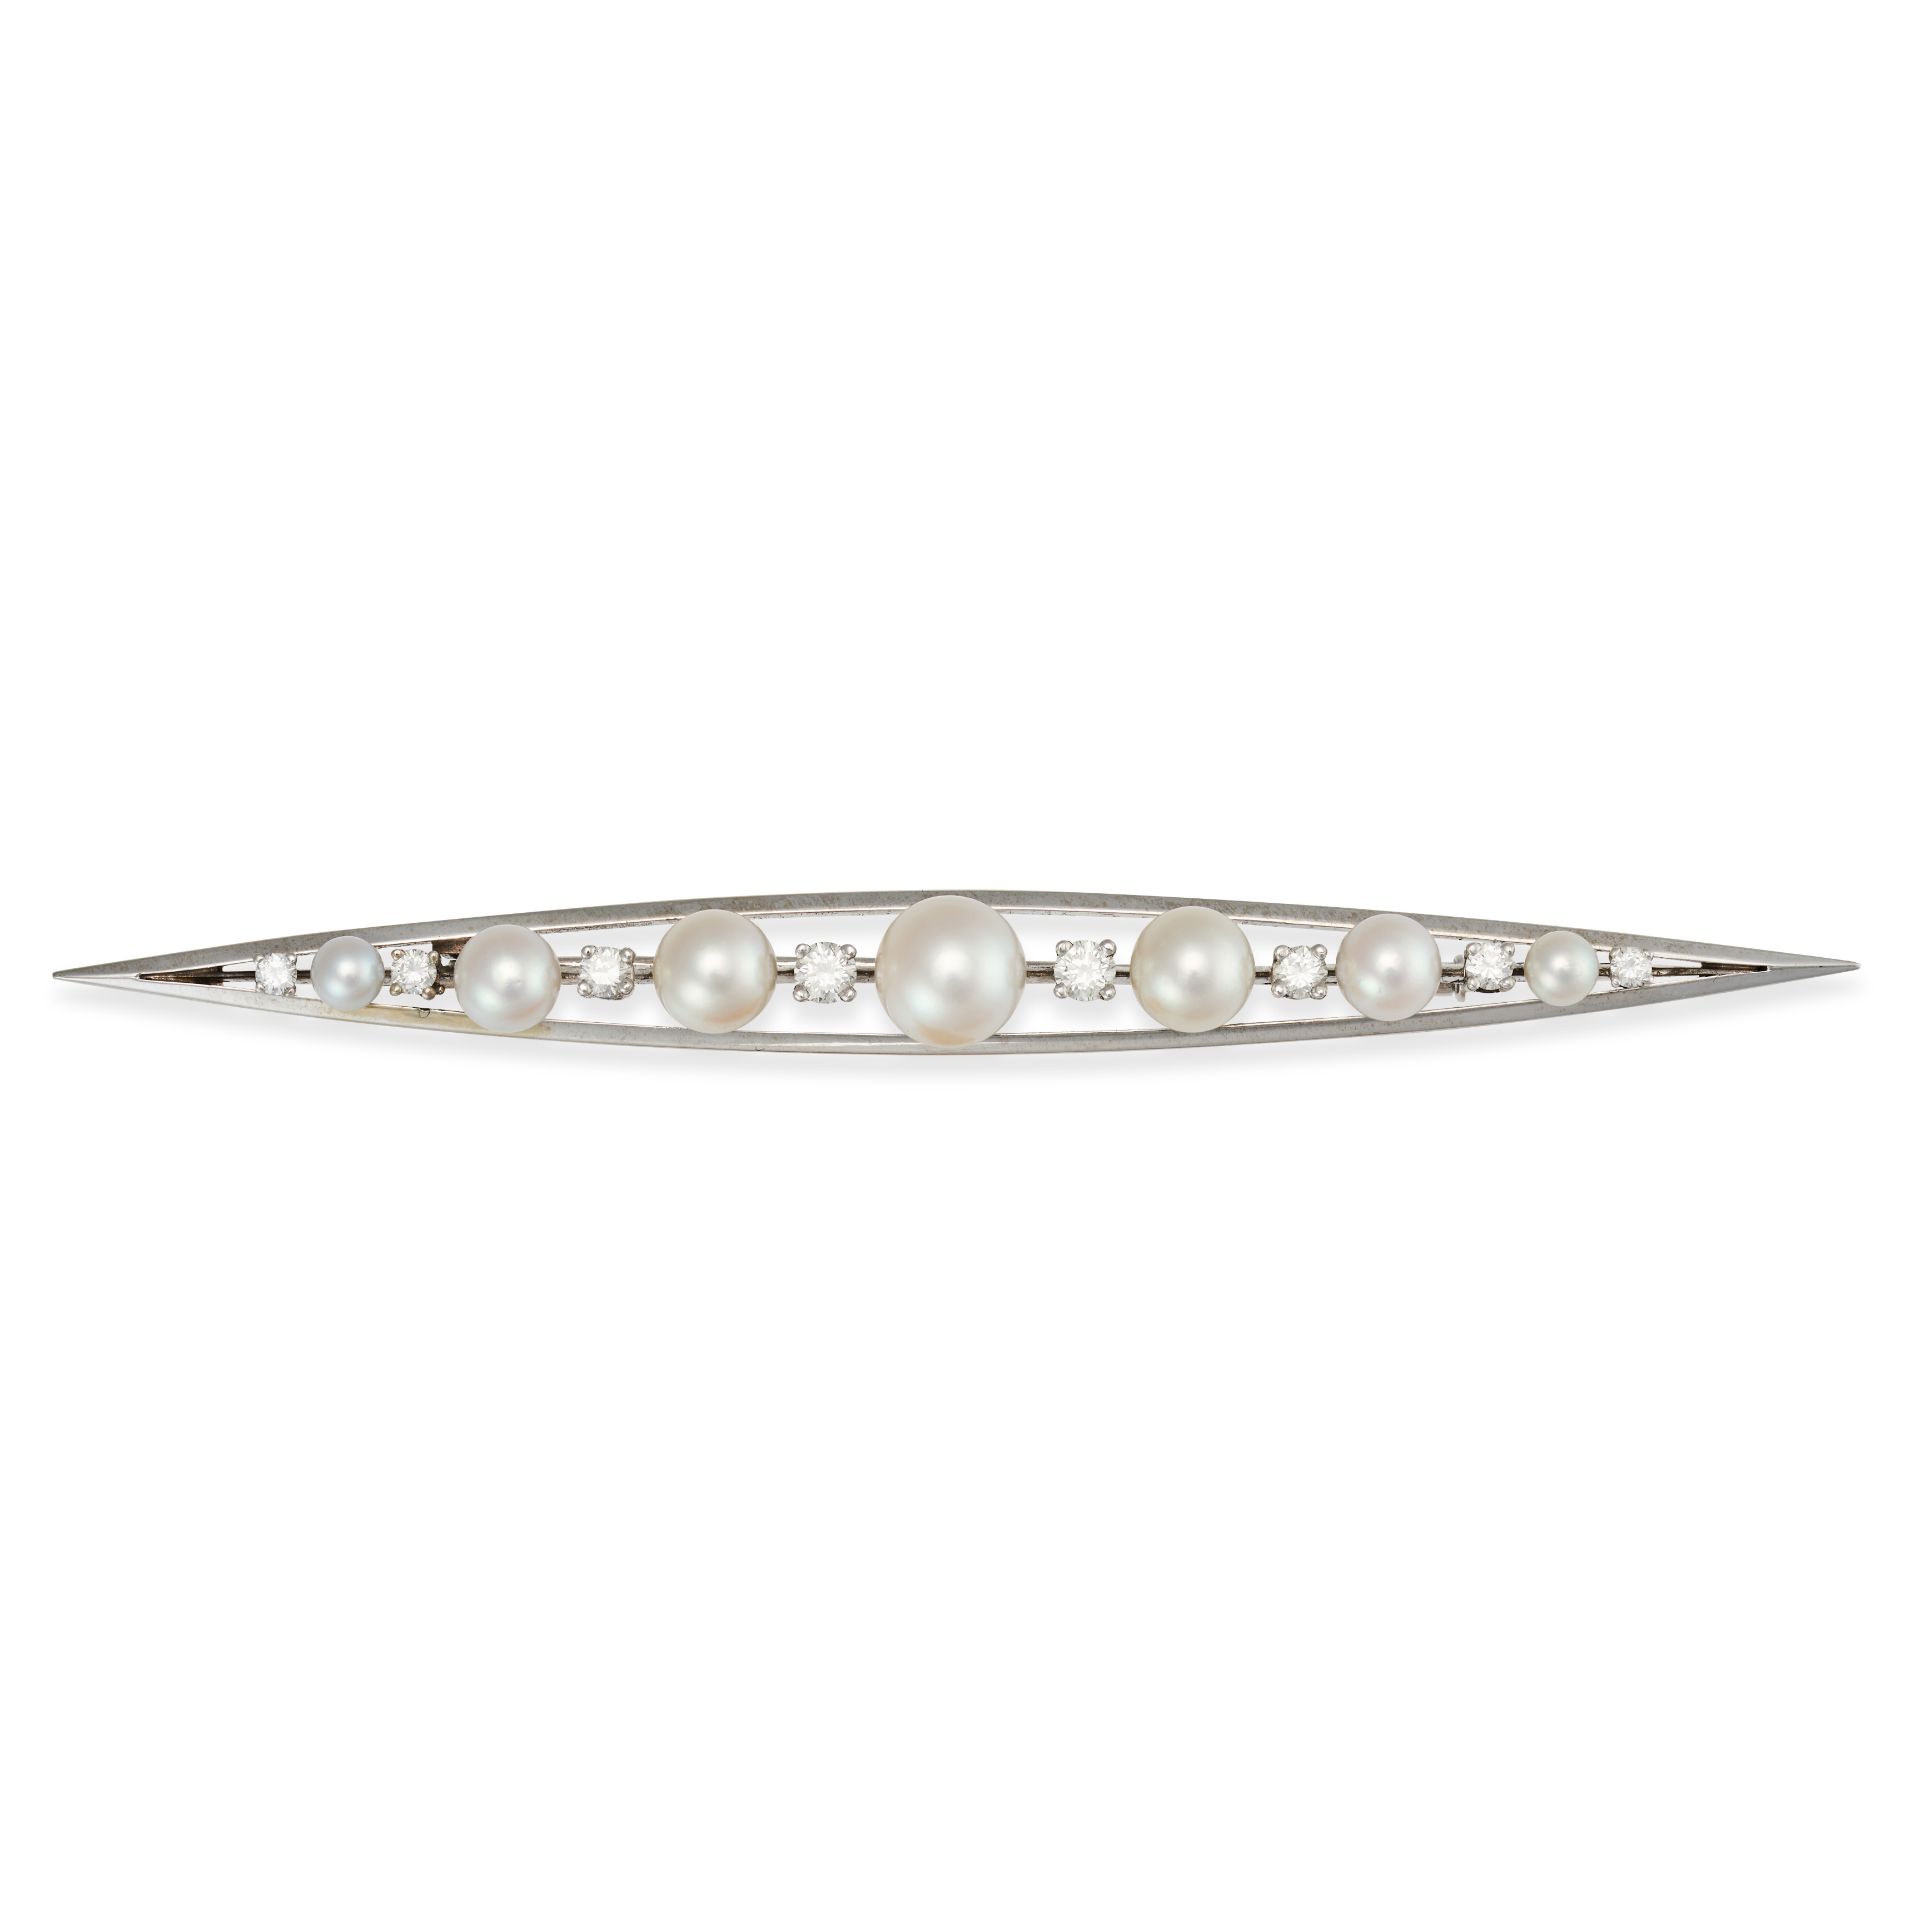 A PEARL AND DIAMOND BAR BROOCH in 18ct white gold, set with alternating pearls and round brillian...